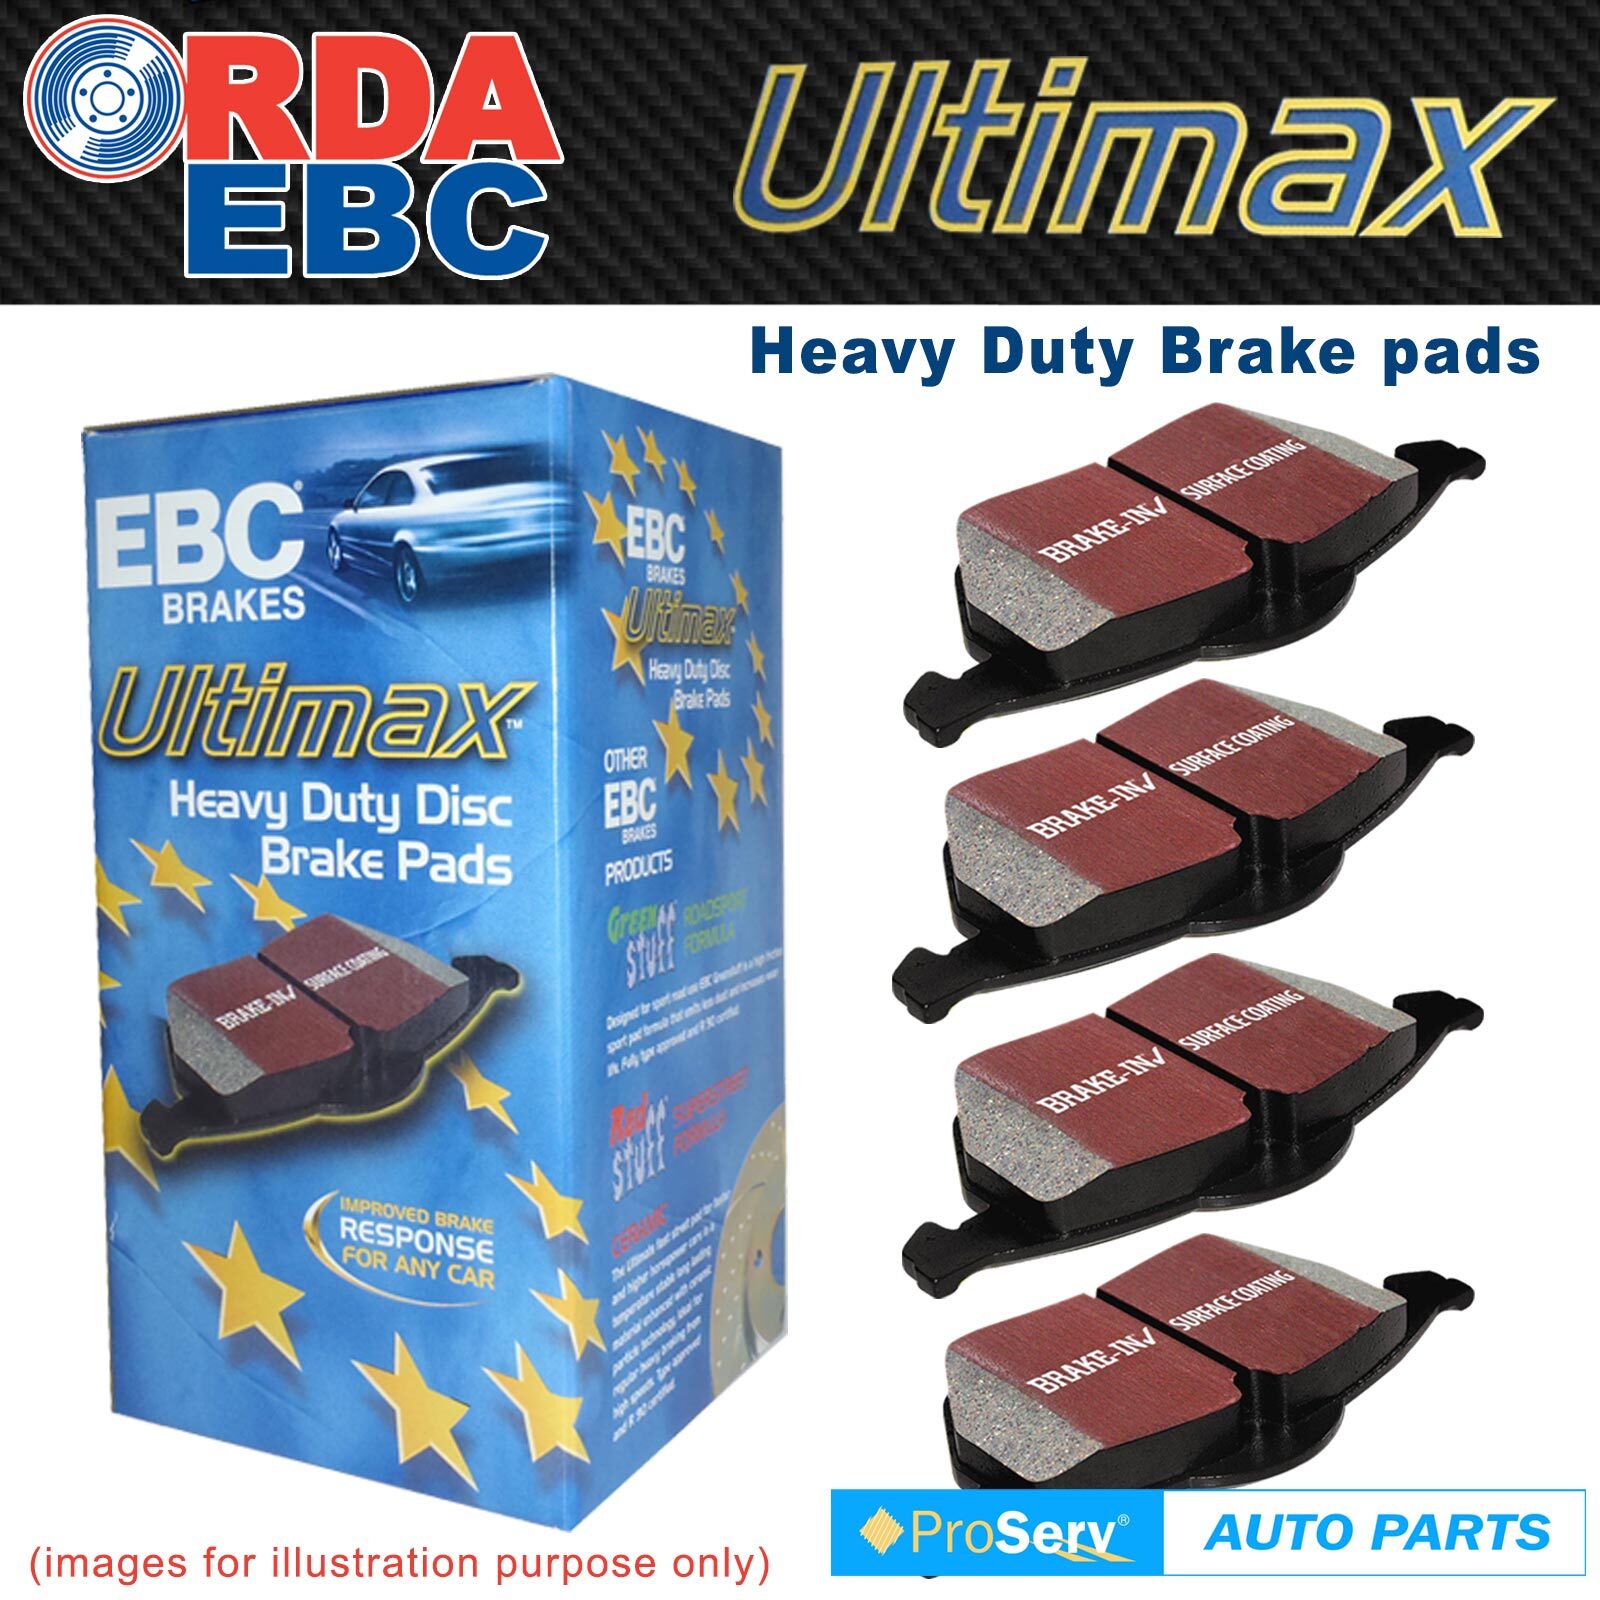 F10 EBC Ultimax Rear Brake Pads for BMW 520 5 Series 2.0 TD DPX2047 2010 